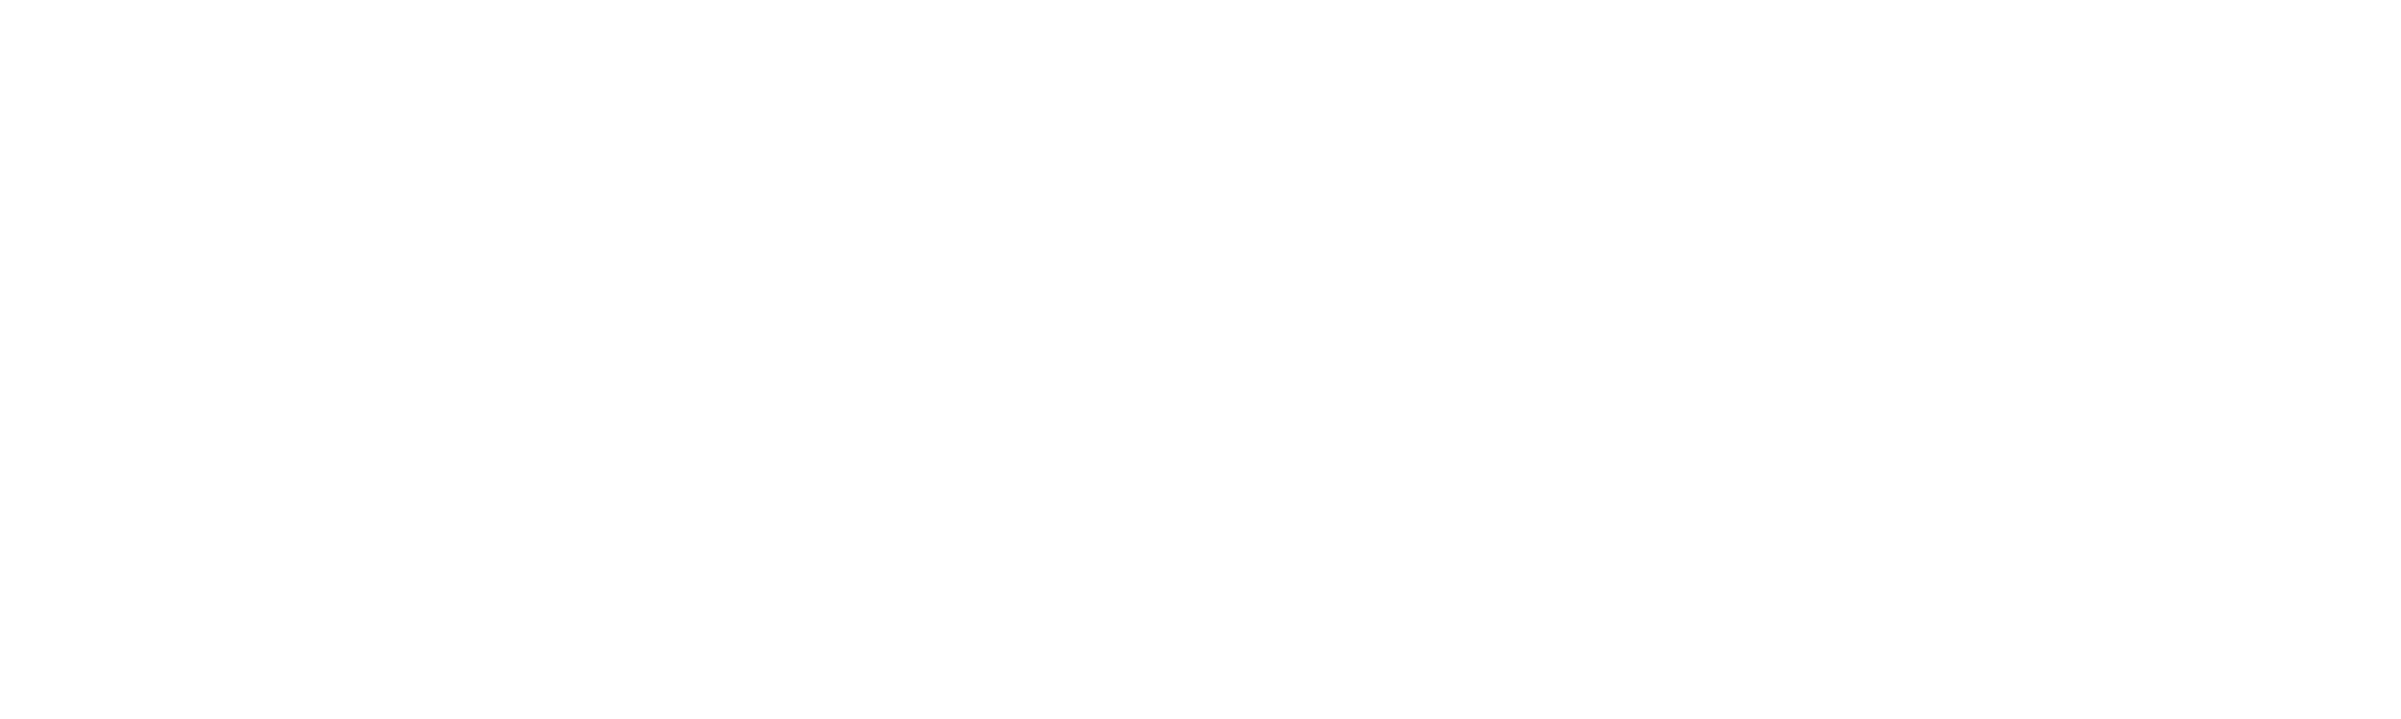 Powered By Text